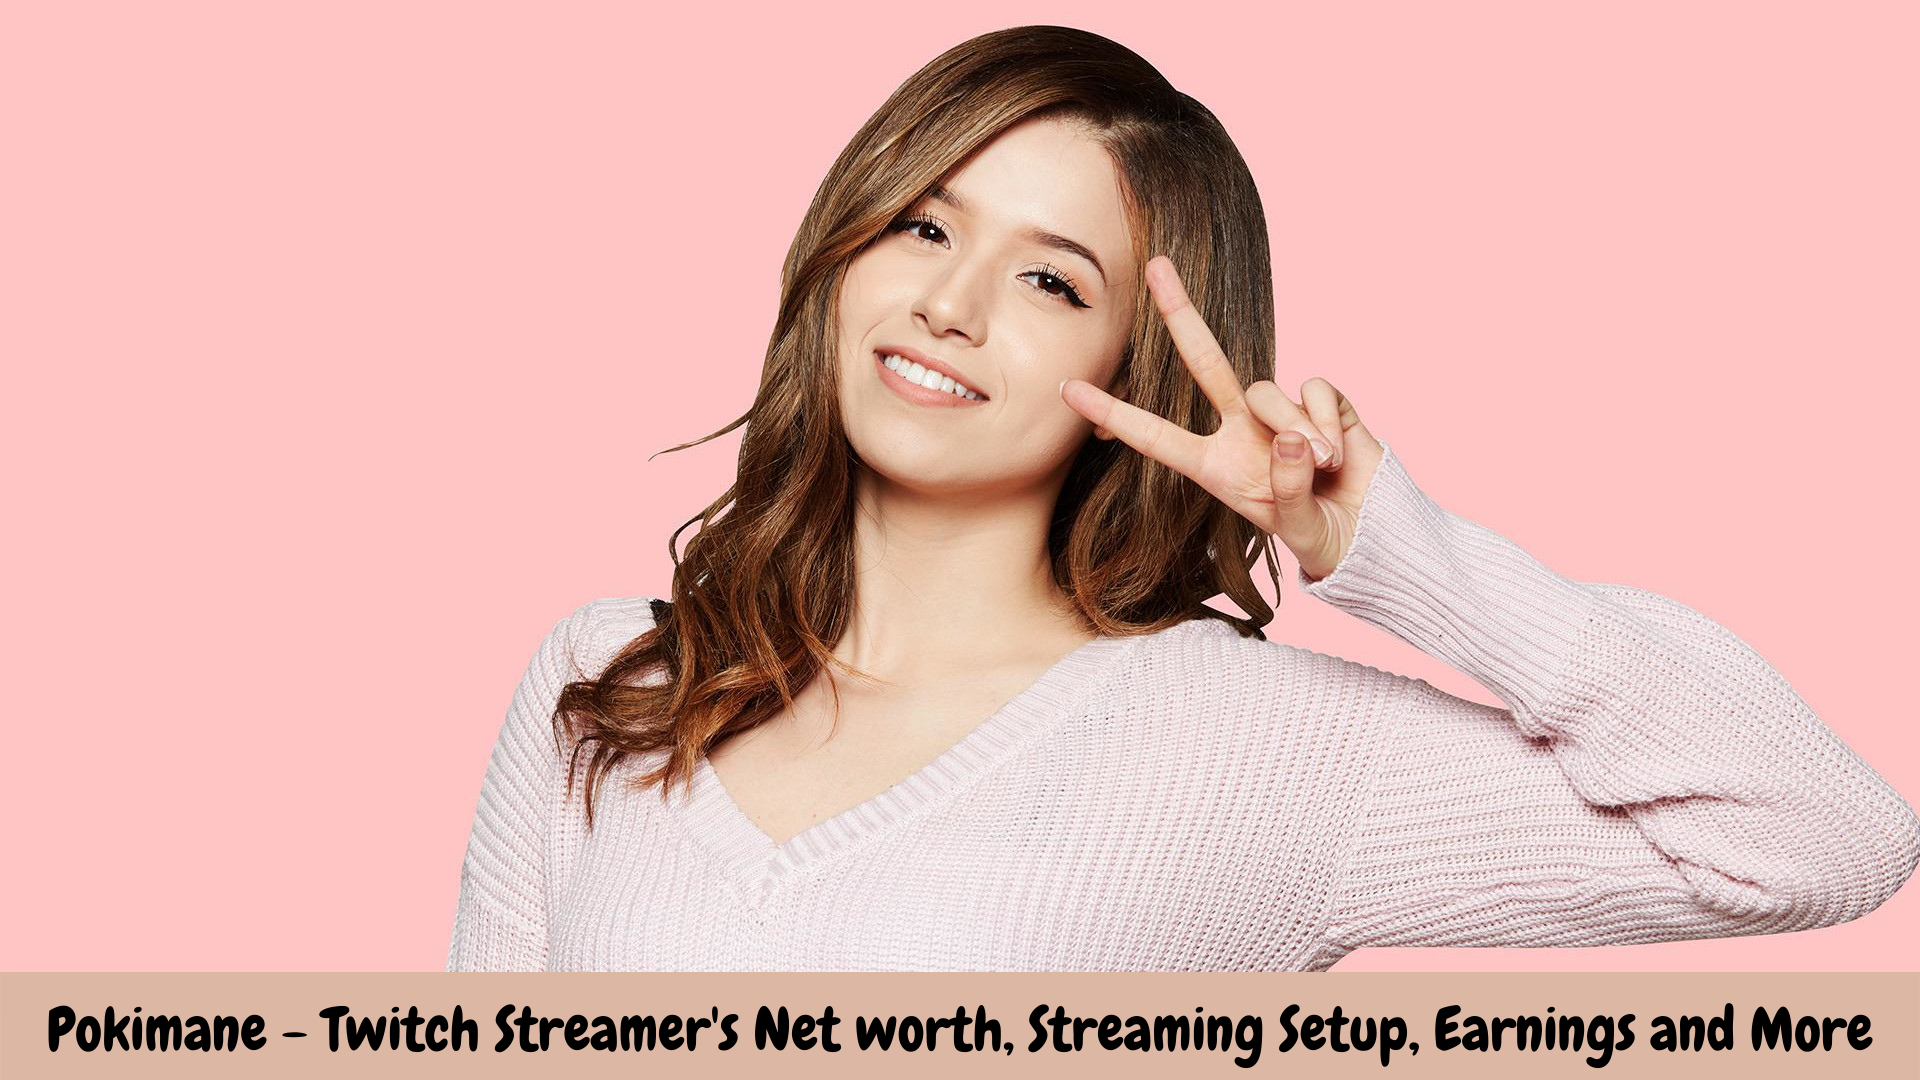 Pokimane - Twitch Streamer's Net worth, Streaming Setup, Earnings and More